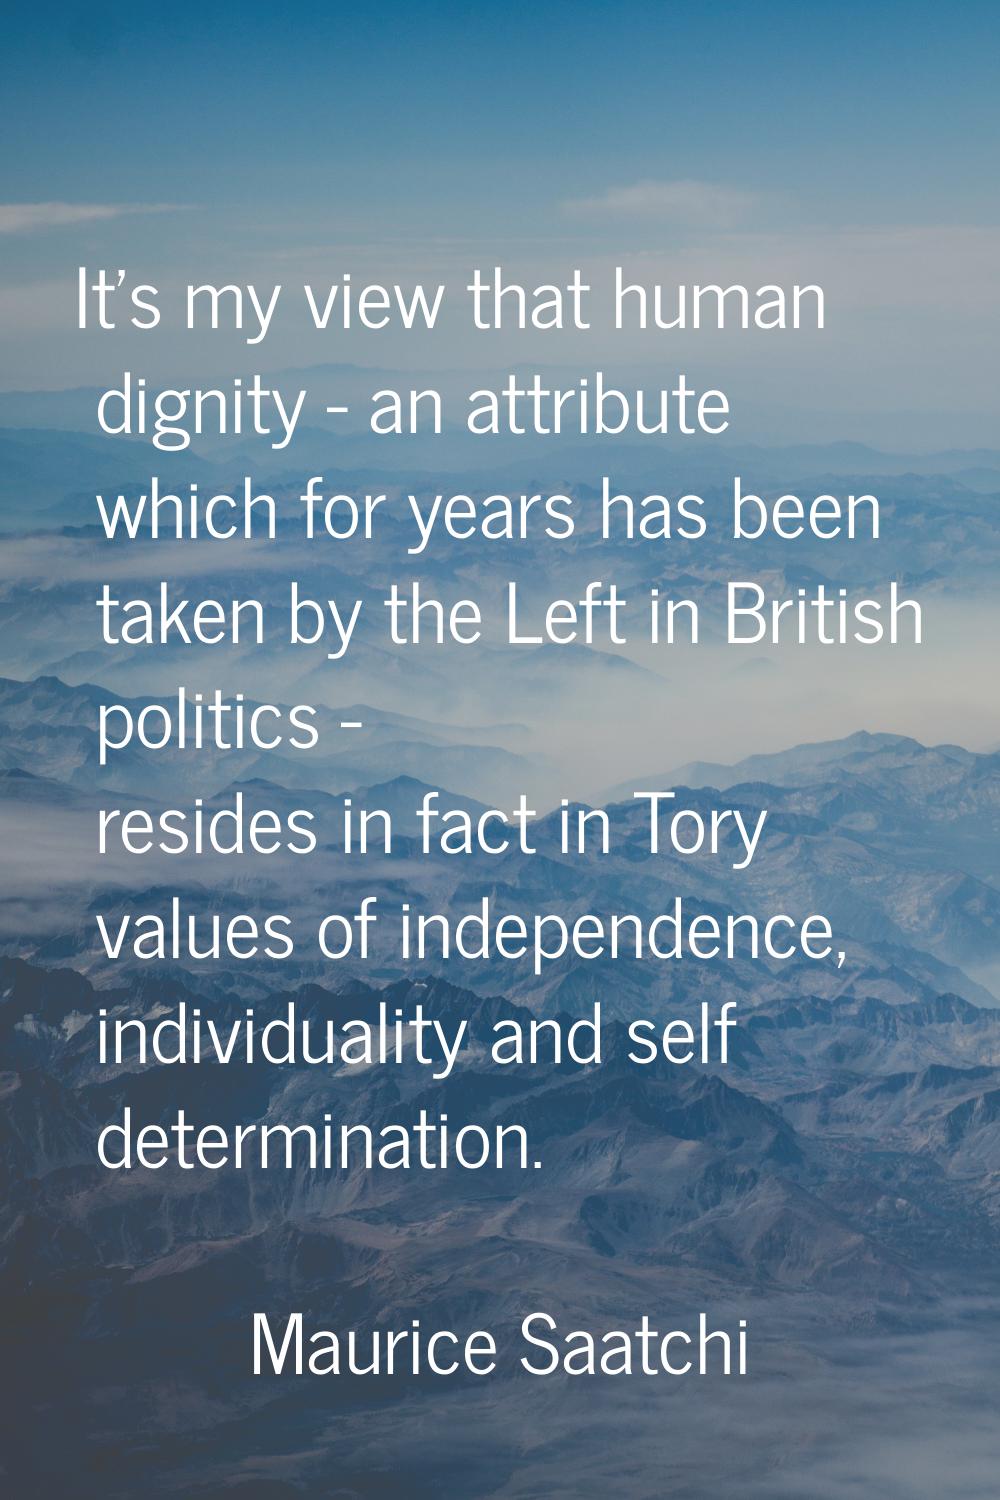 It's my view that human dignity - an attribute which for years has been taken by the Left in Britis